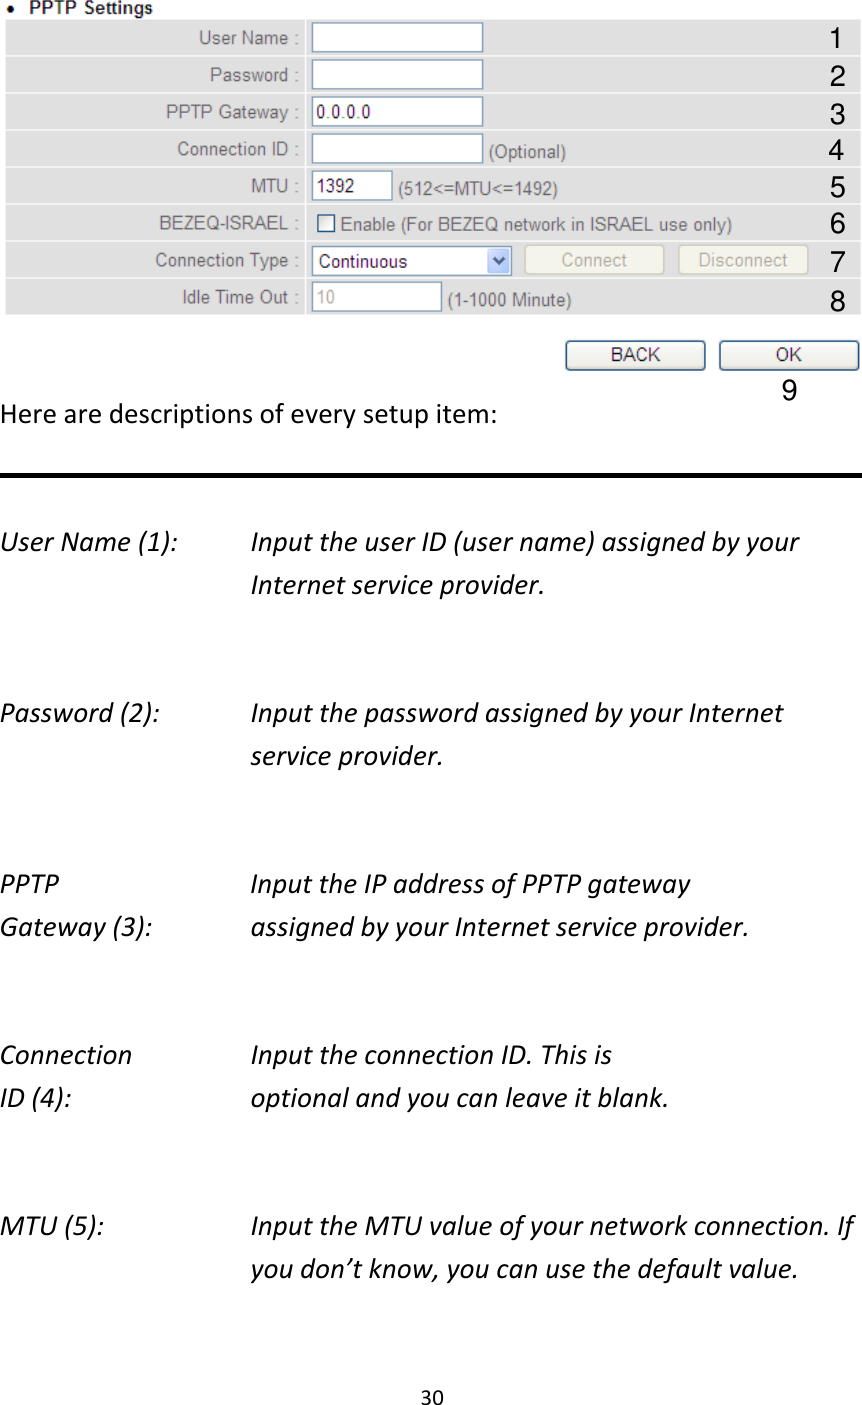 30   Here are descriptions of every setup item:  User Name (1):    Input the user ID (user name) assigned by your Internet service provider.  Password (2):    Input the password assigned by your Internet service provider.  PPTP    Input the IP address of PPTP gateway Gateway (3):    assigned by your Internet service provider.  Connection       Input the connection ID. This is ID (4):          optional and you can leave it blank.  MTU (5):    Input the MTU value of your network connection. If you don’t know, you can use the default value.  1 2 3 4 5 6 7 9 8 